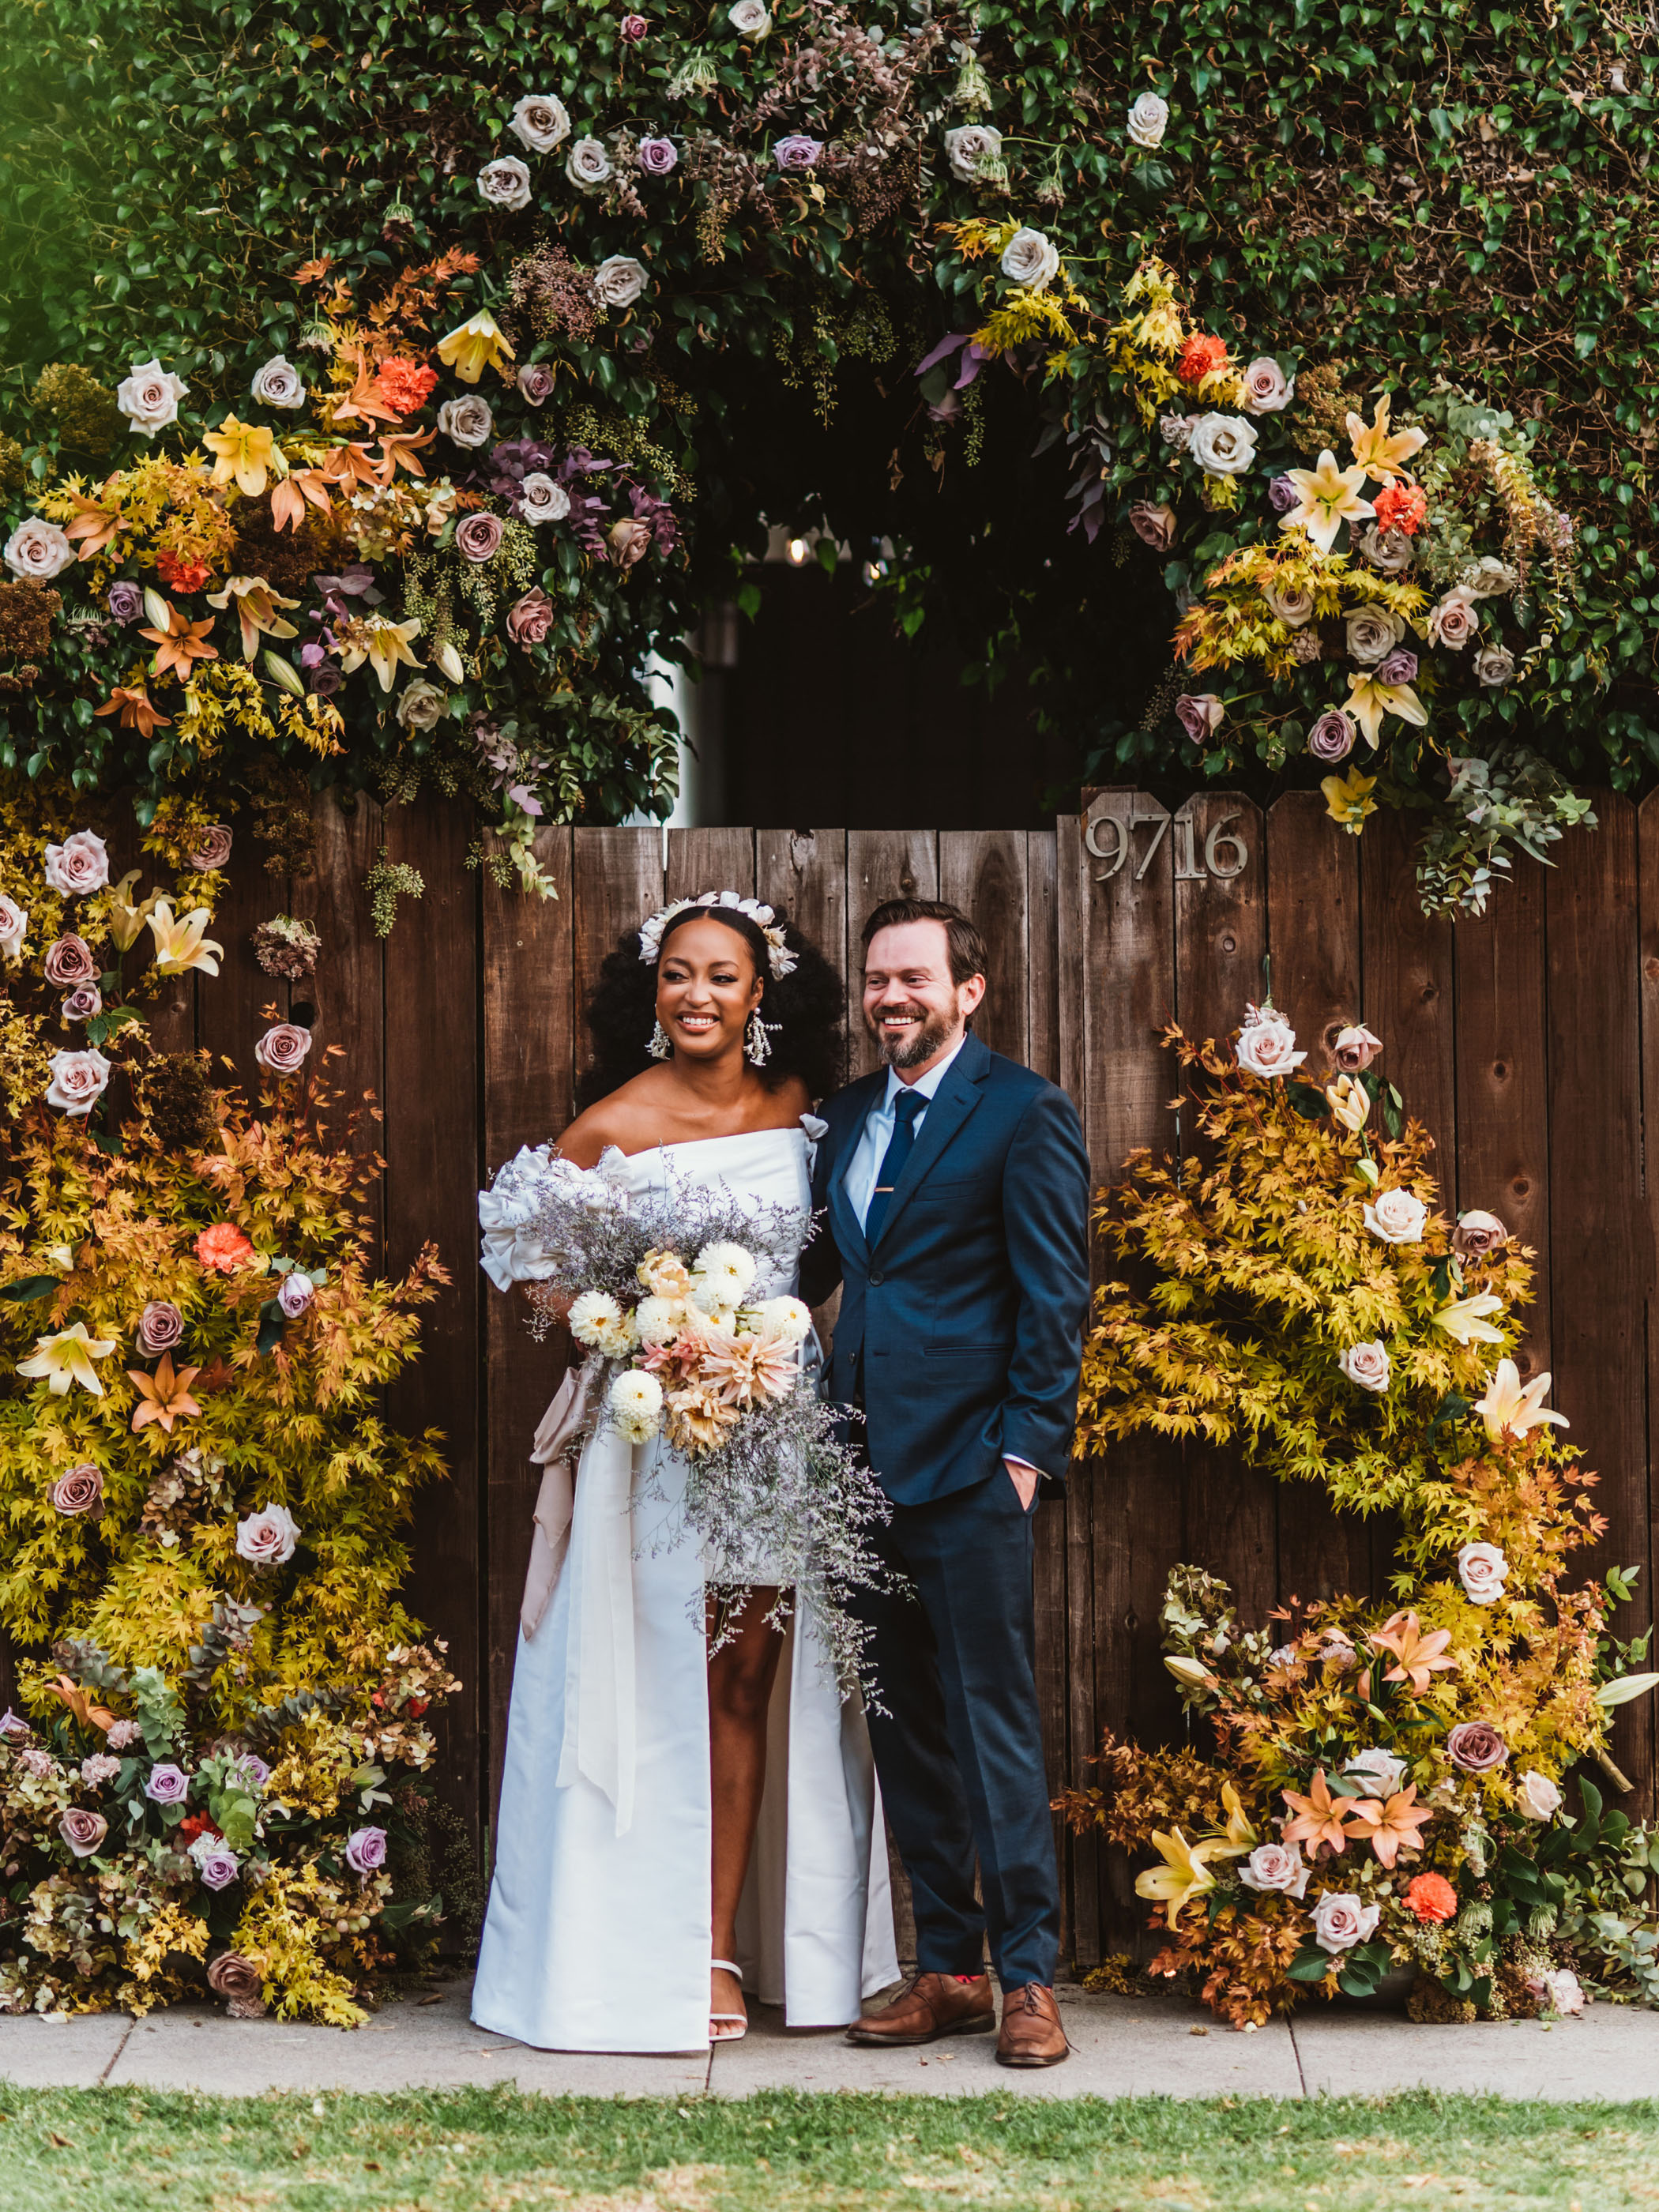 Bride and groom in front of floral backdrop